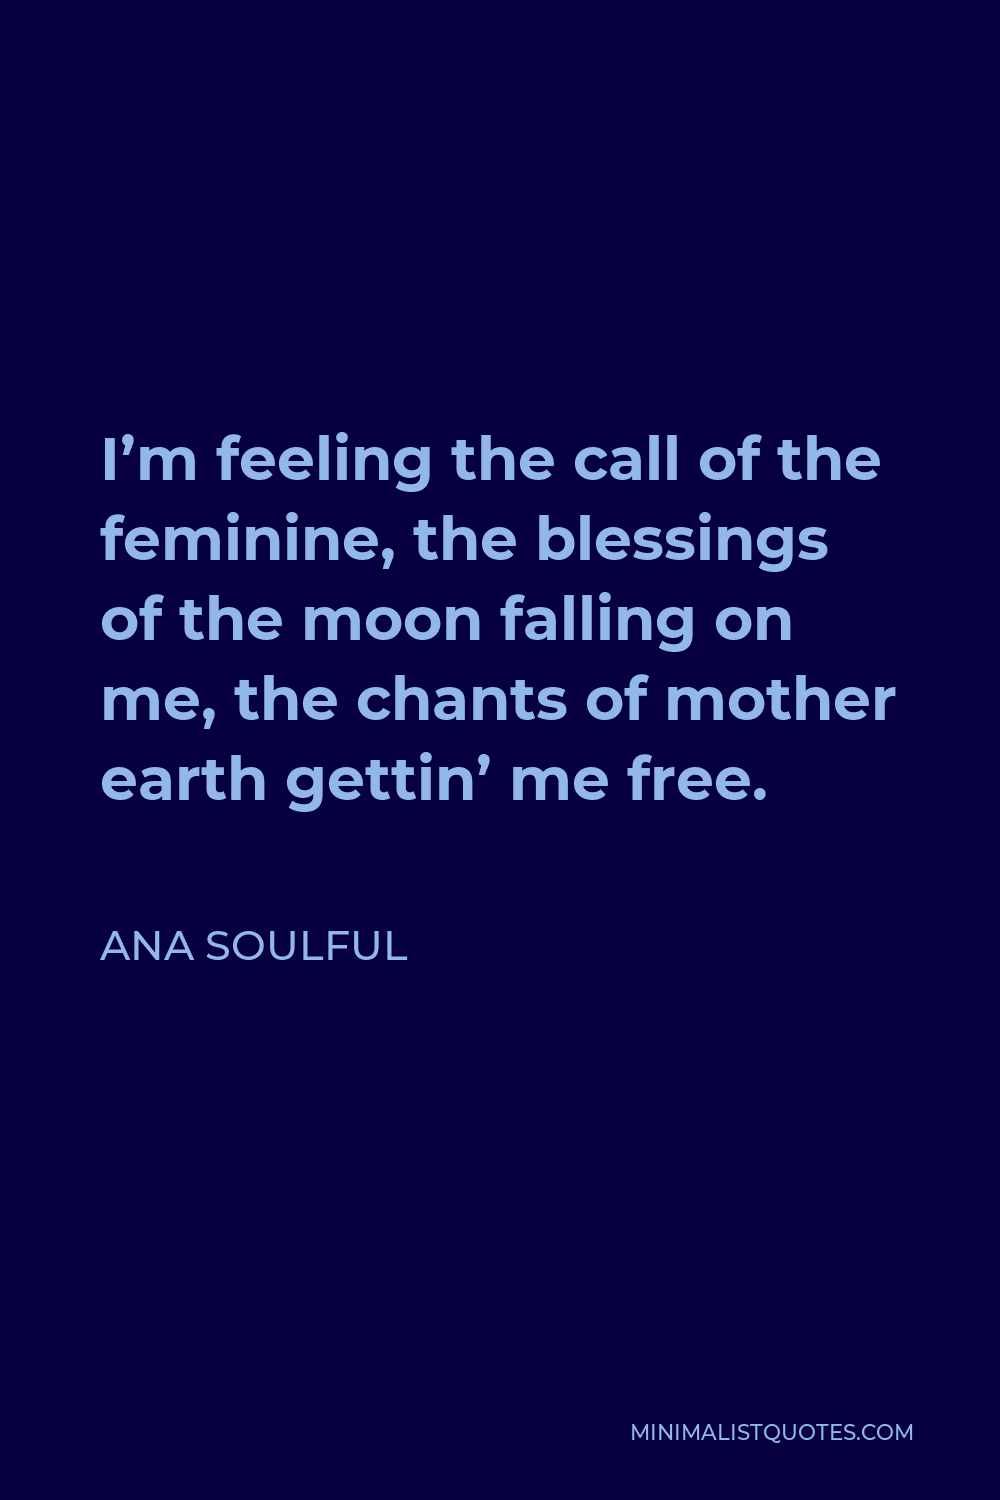 Ana Soulful Quote - I’m feeling the call of the feminine, the blessings of the moon falling on me, the chants of mother earth gettin’ me free.